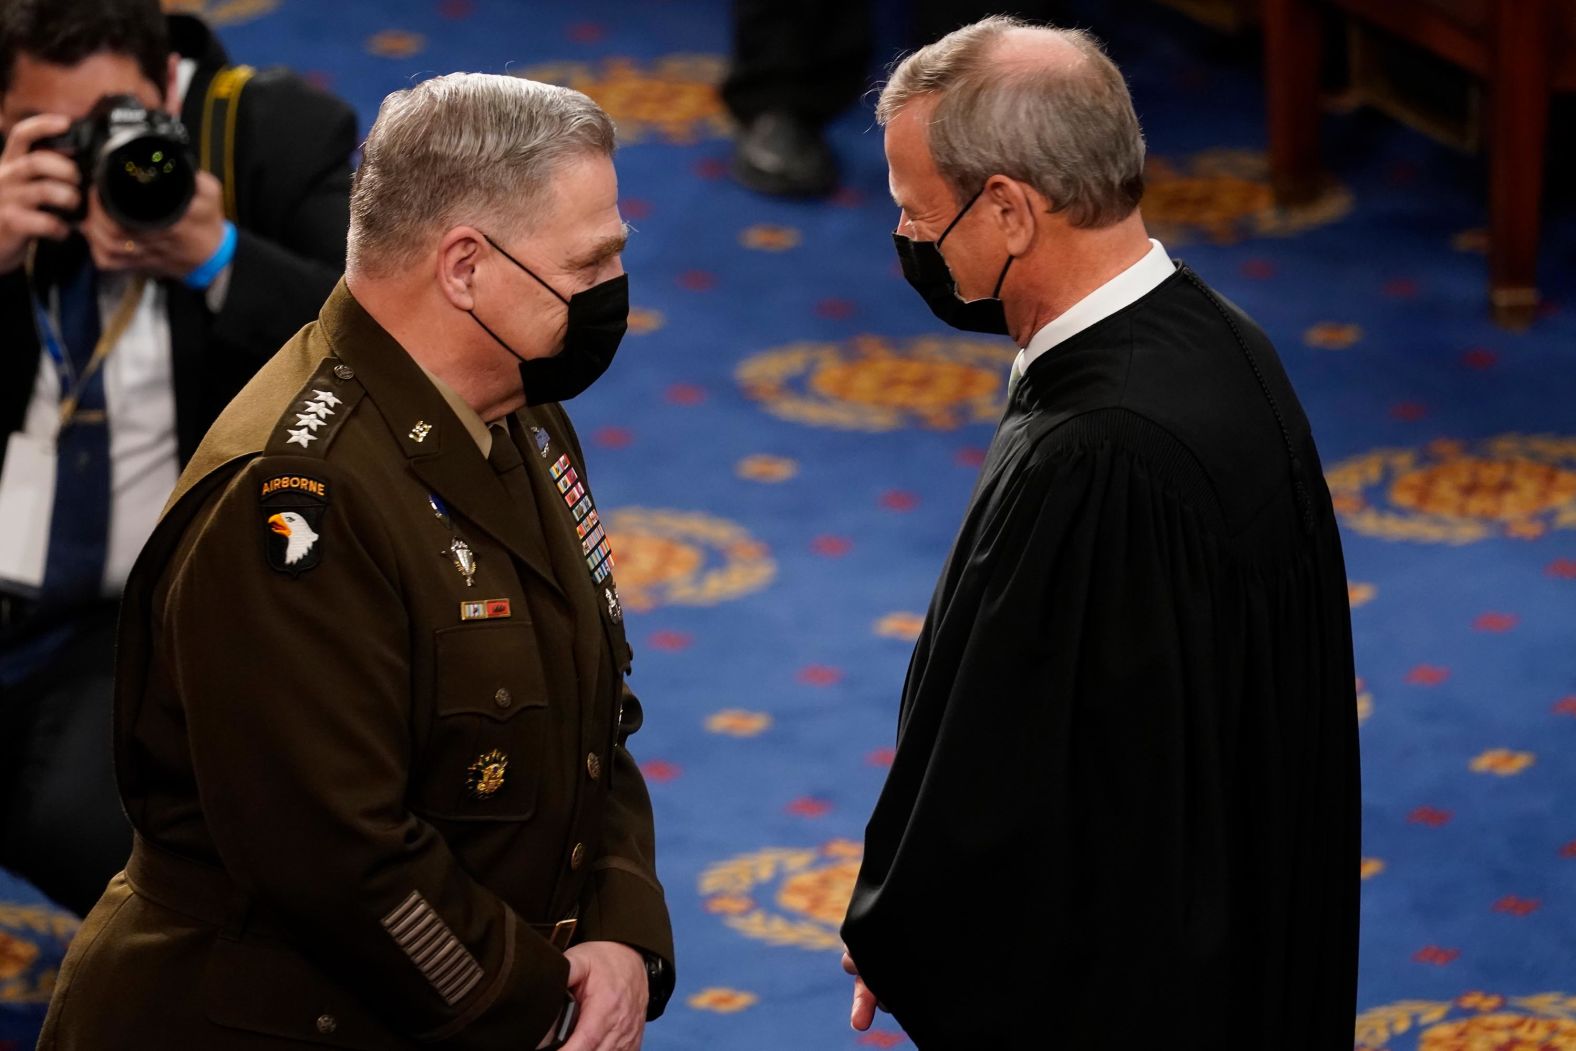 Chief Justice John Roberts talks with Gen. Mark Milley, the chairman of the Joint Chiefs of Staff, before the speech. Because of the pandemic restrictions, Roberts was the only member of the Supreme Court in attendance.